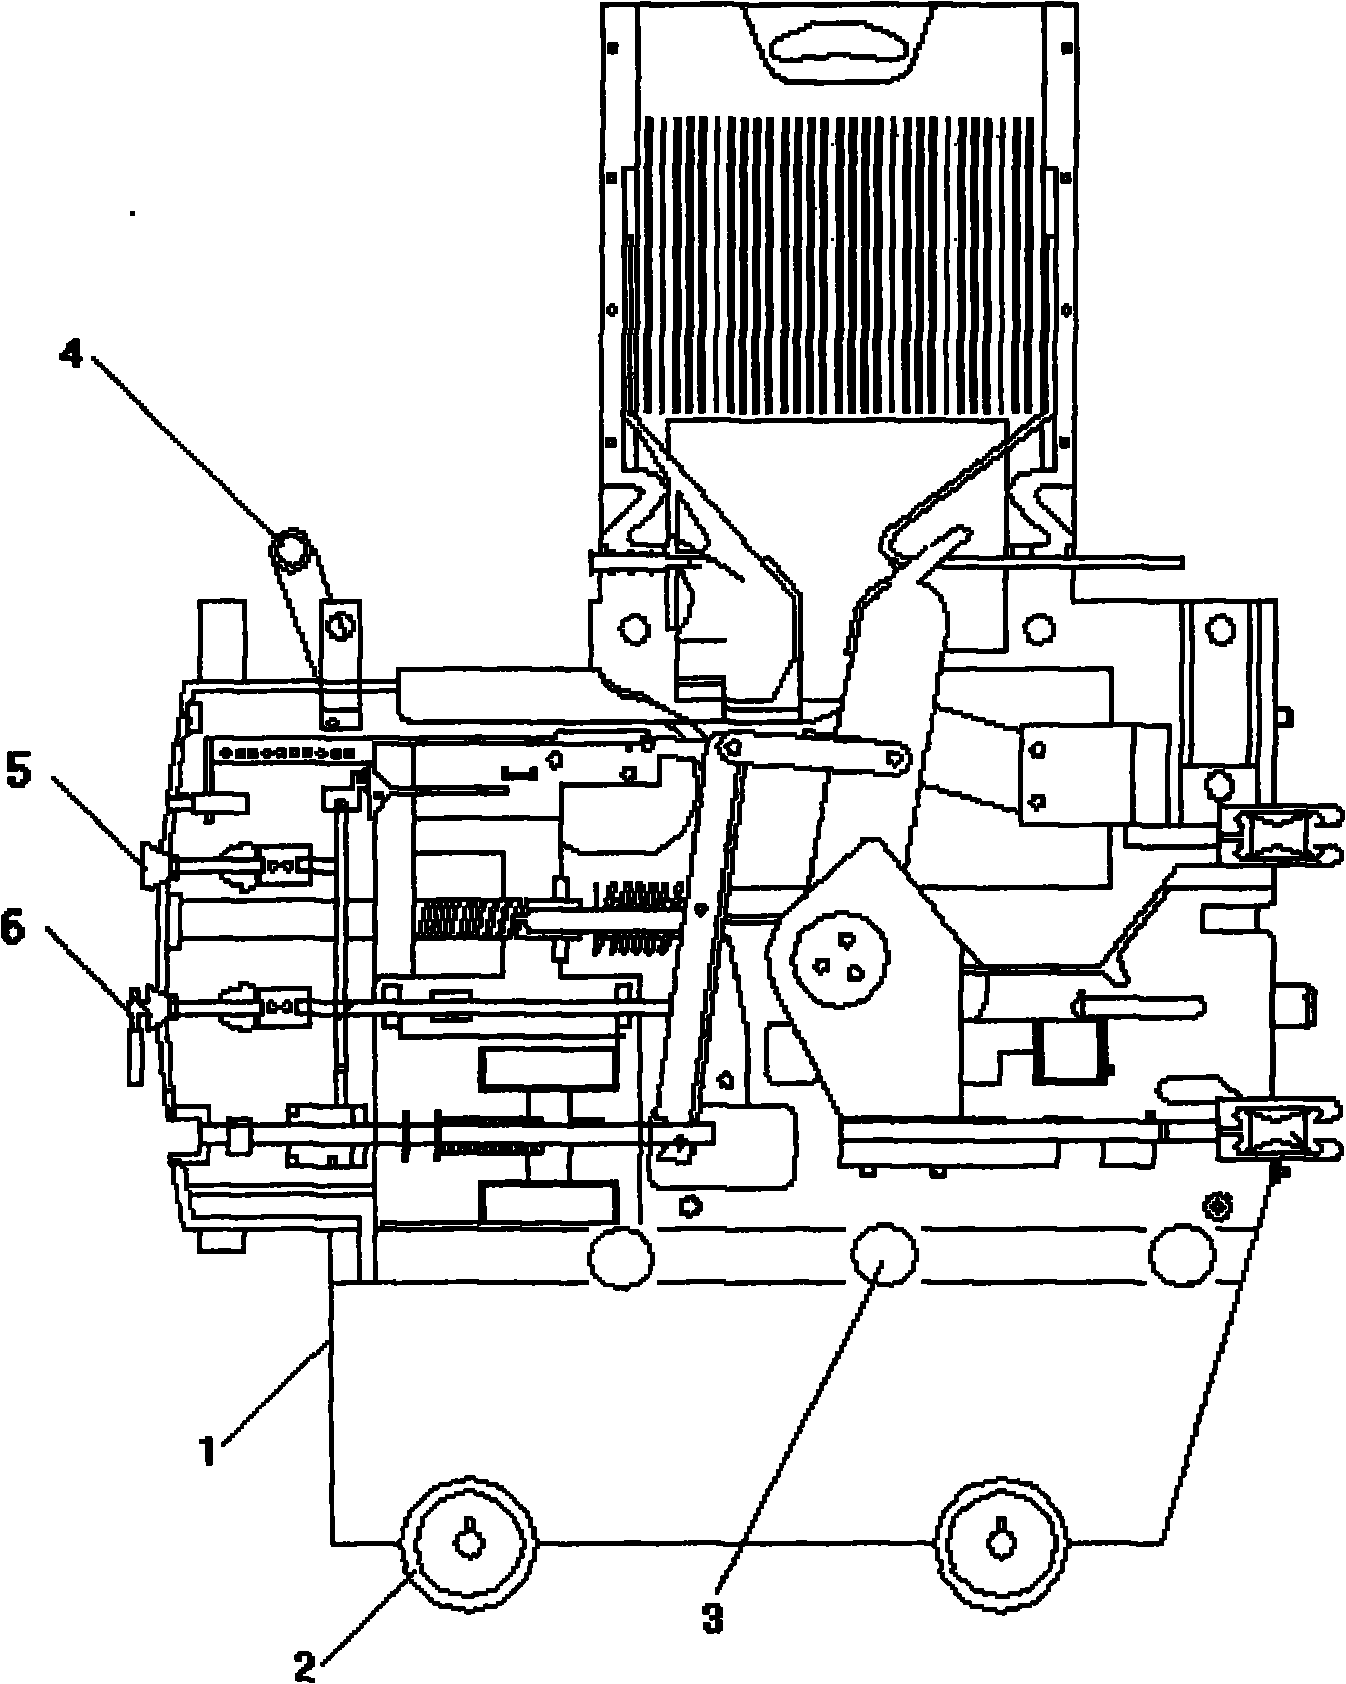 Logic control interlocking structure for handcart in-out and manual separate-switch brake of circuit breaker